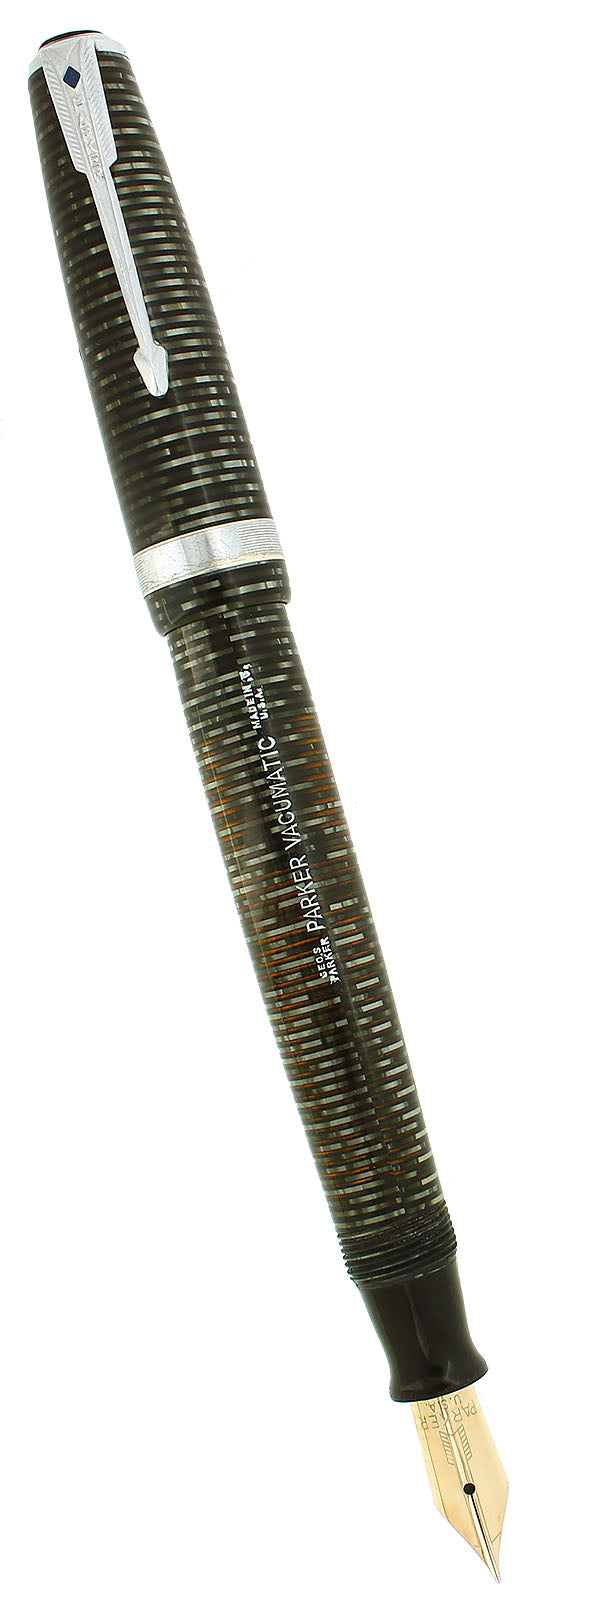 1945 PARKER SILVER PEARL VACUMATIC COIN STACK CAP MAJOR FOUNTAIN PEN RESTORED OFFERED BY ANTIQUE DIGGER